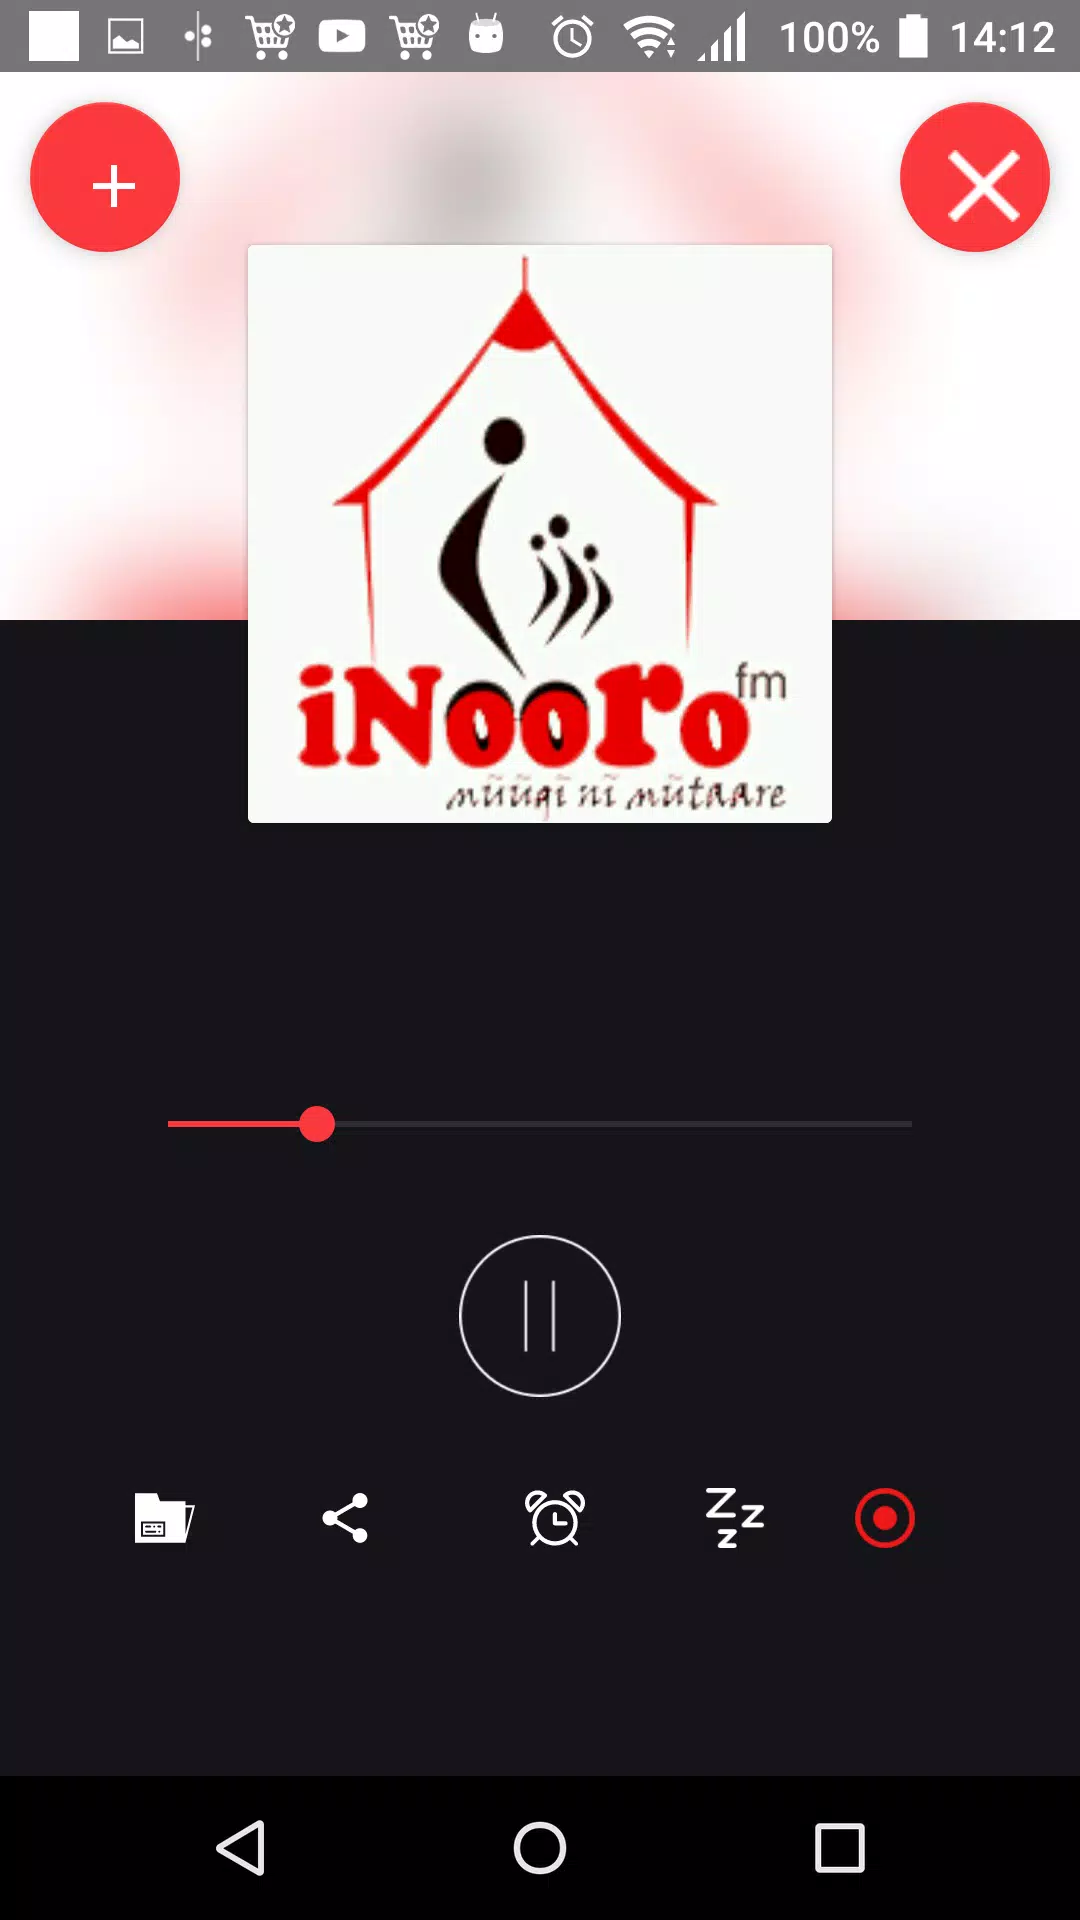 iNooro FM na Tv Live for Android - APK Download